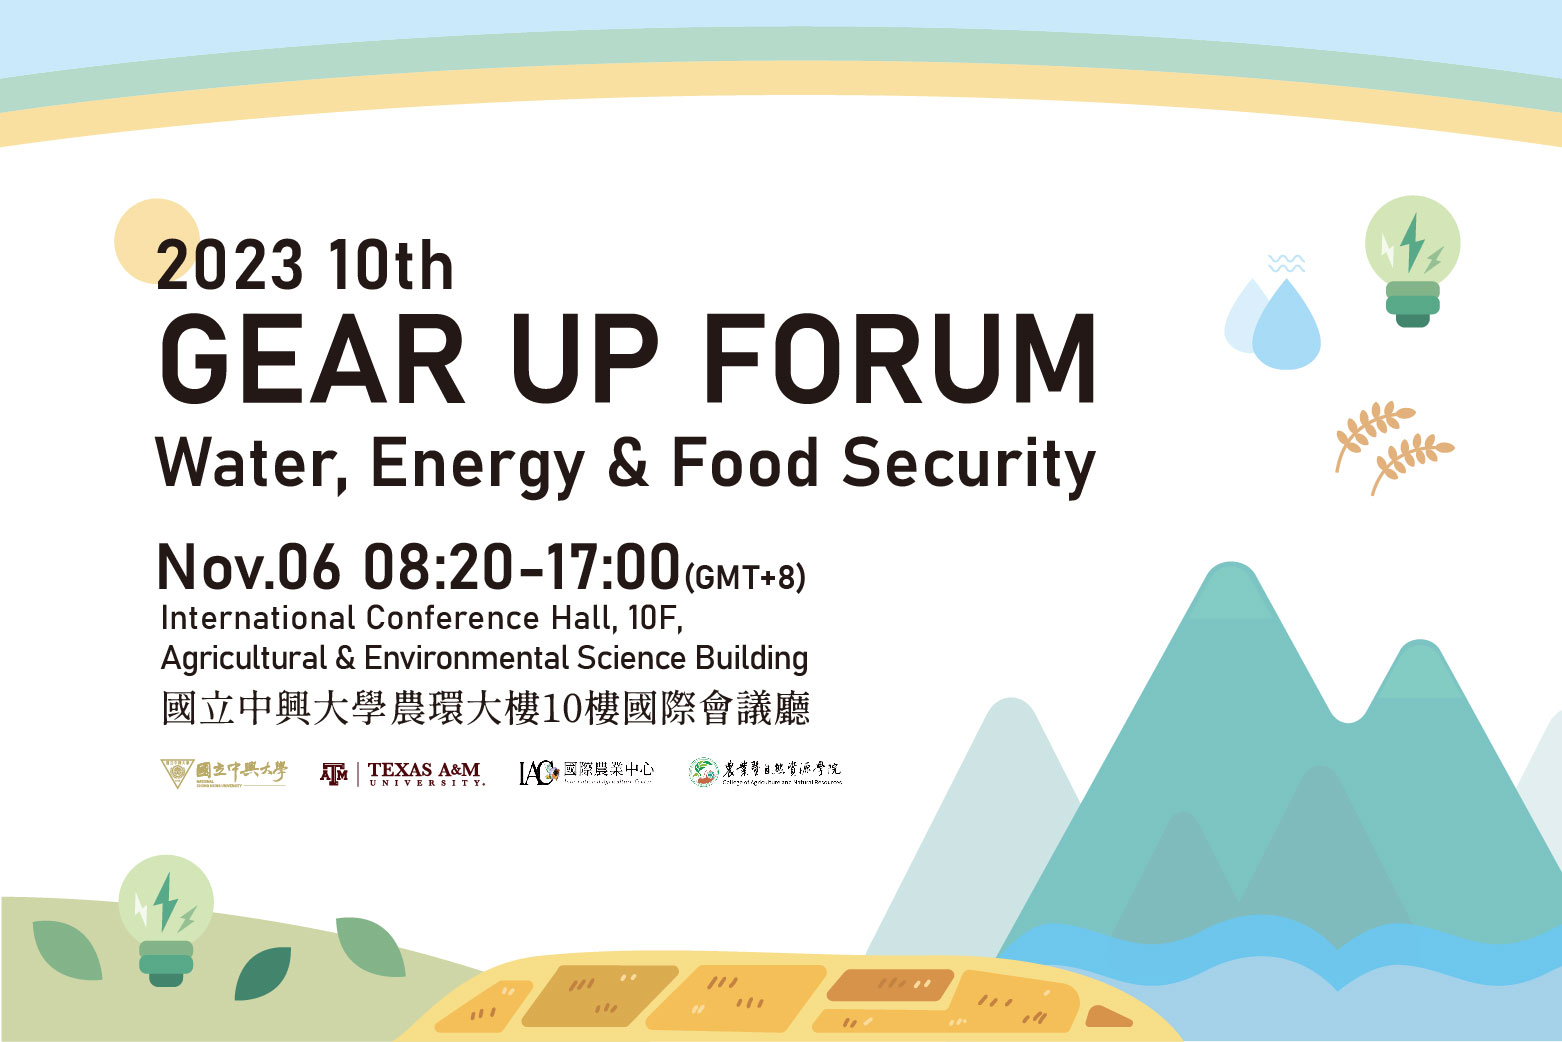 The 10th GEAR UP Forum - Water, Energy & Food Security 